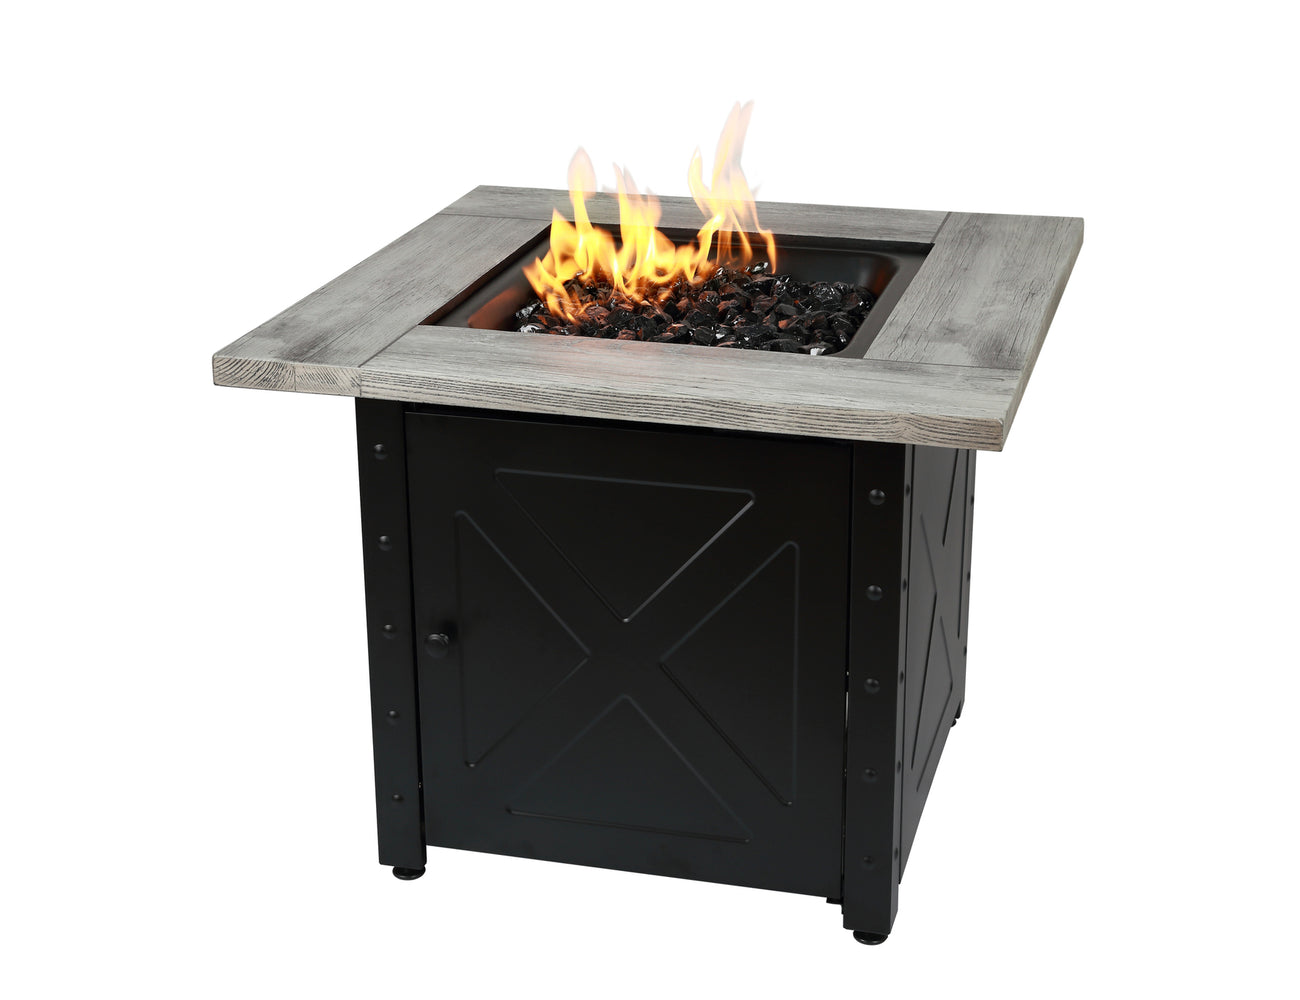 30" LP Square Gas Outdoor Fire Pit - The Mason